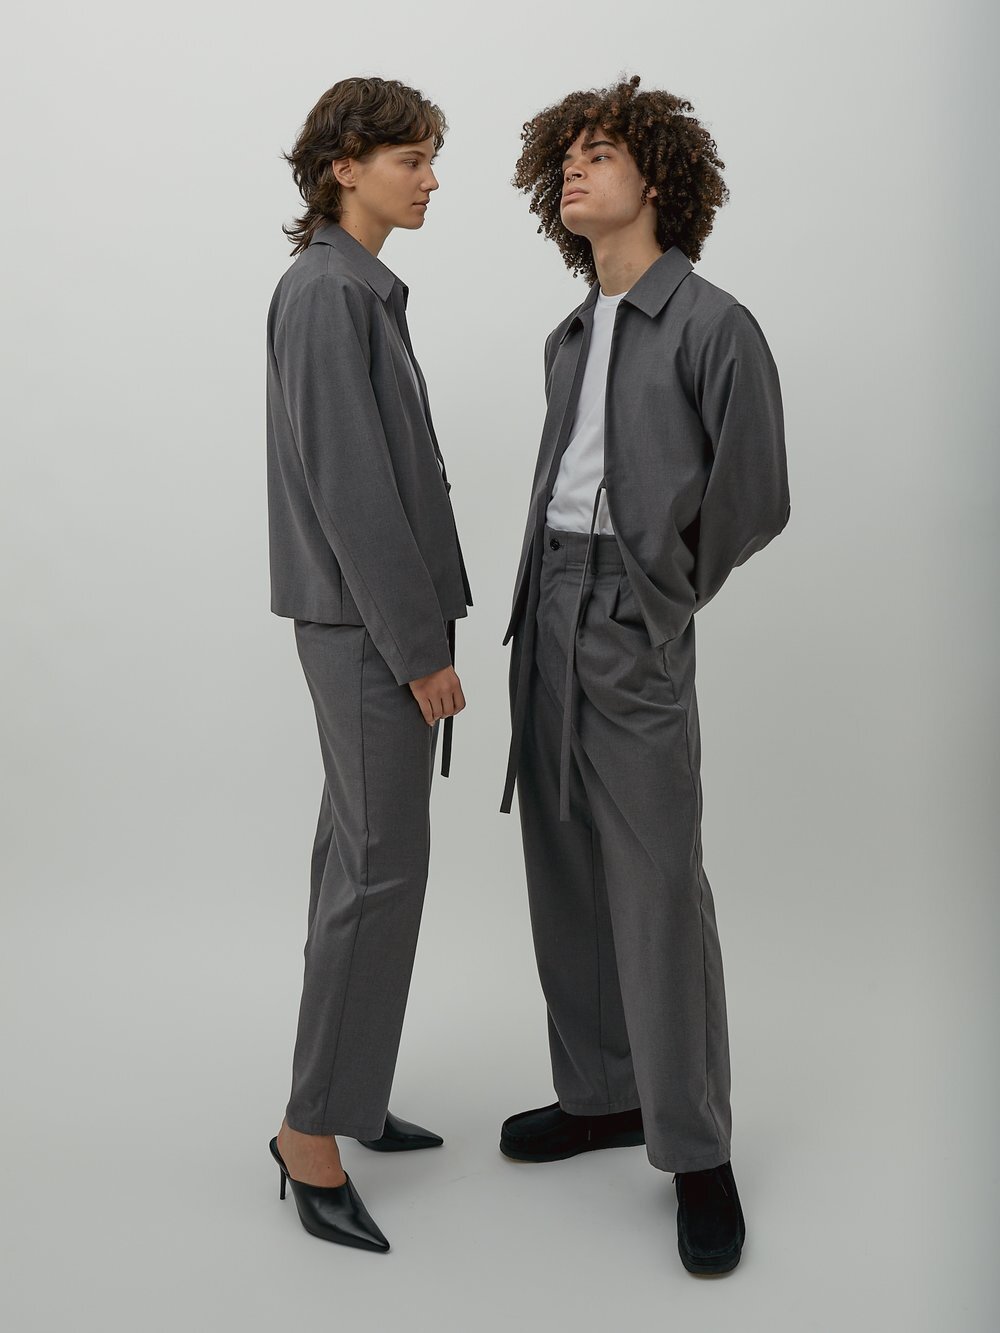 Shop+Gender+Neutral+Suiting+by+One+DNA.jpg